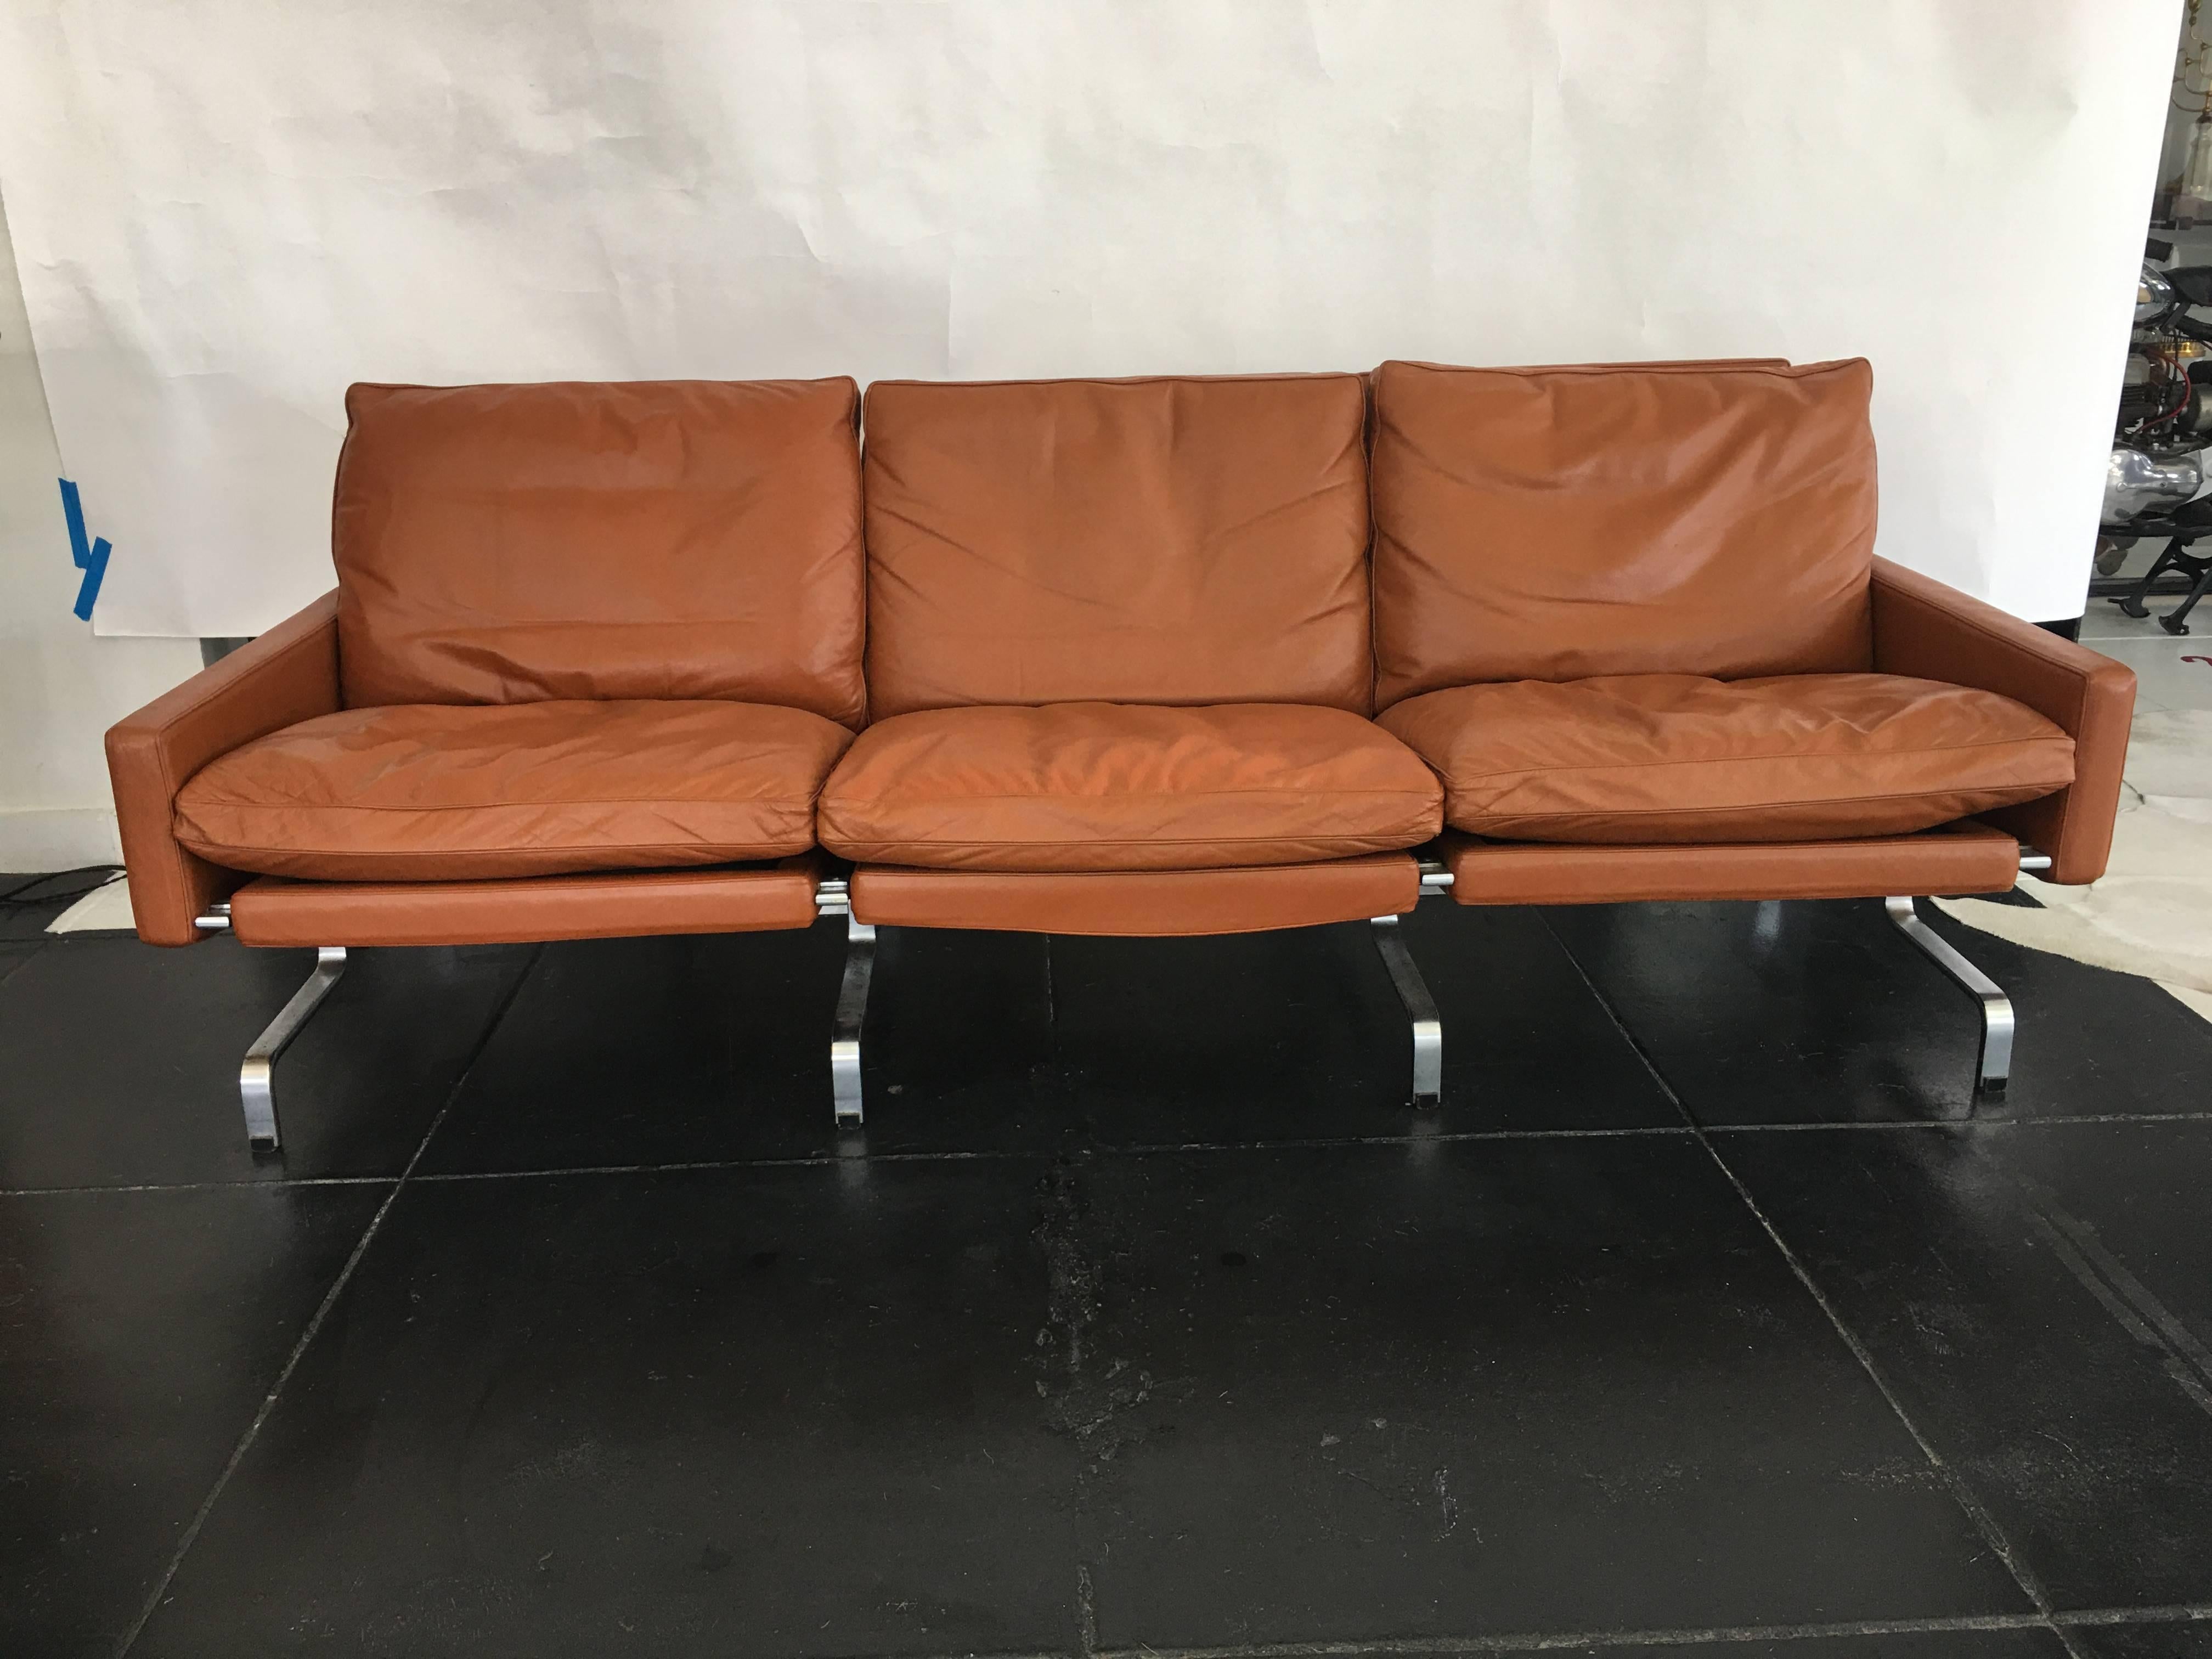 Most incredible PK31/3 sofa by Poul Kjaerholm, deigned 1958, produced 1970s for E, Kold Christensen. Tan color leather and matte chrome-plated steel, excellent condition.
 